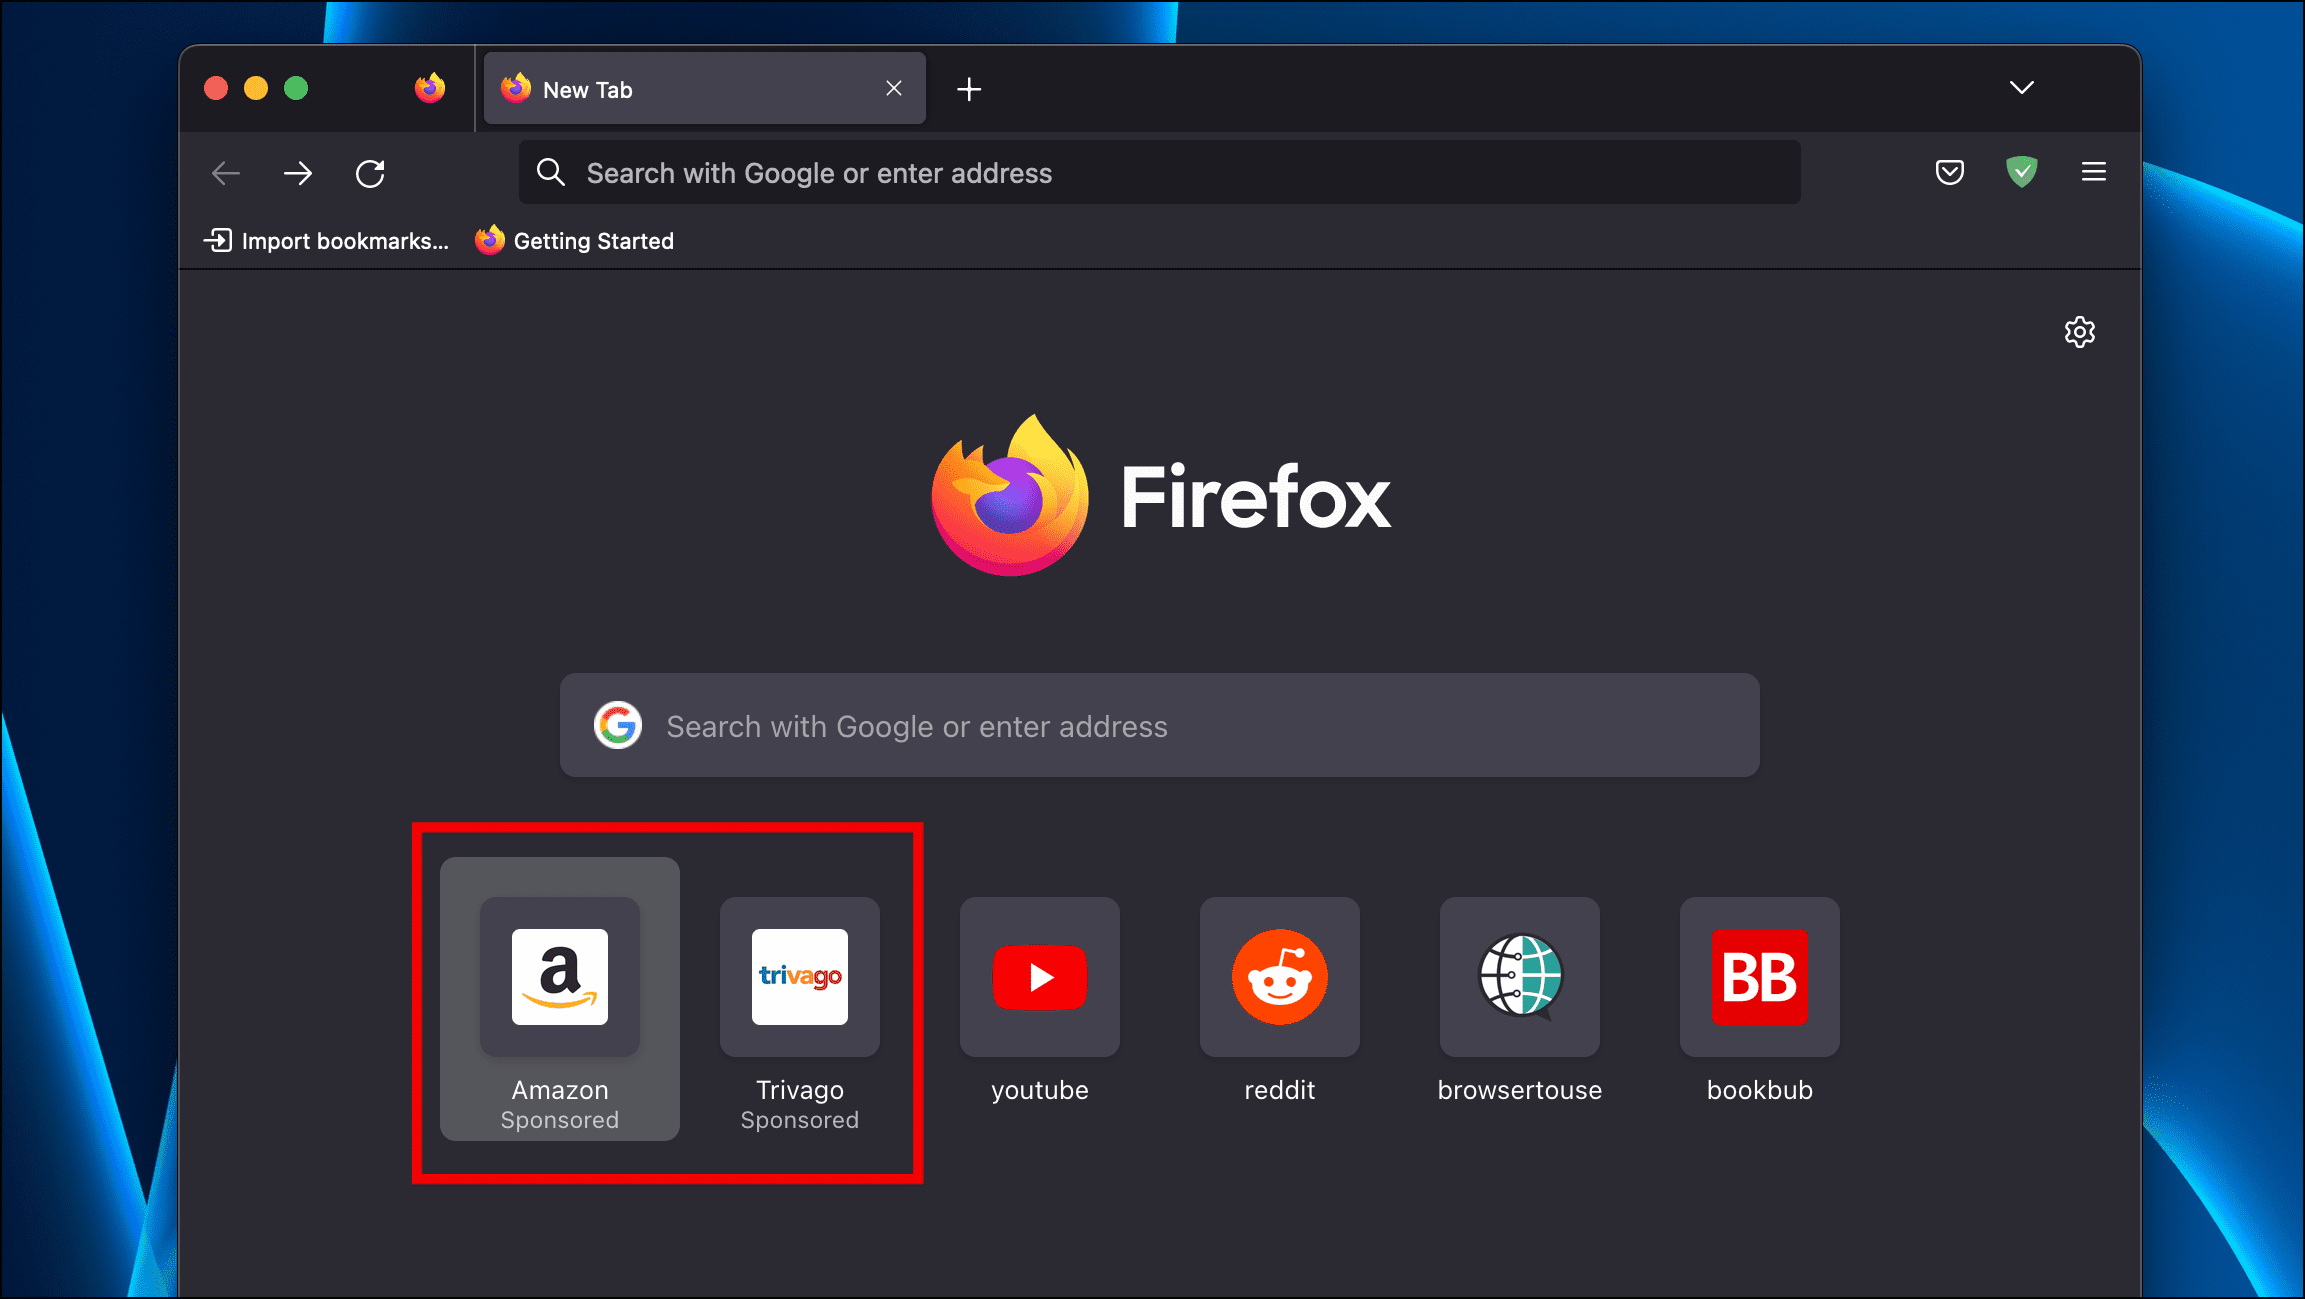 Sponored Links in Firefox New Tab Page